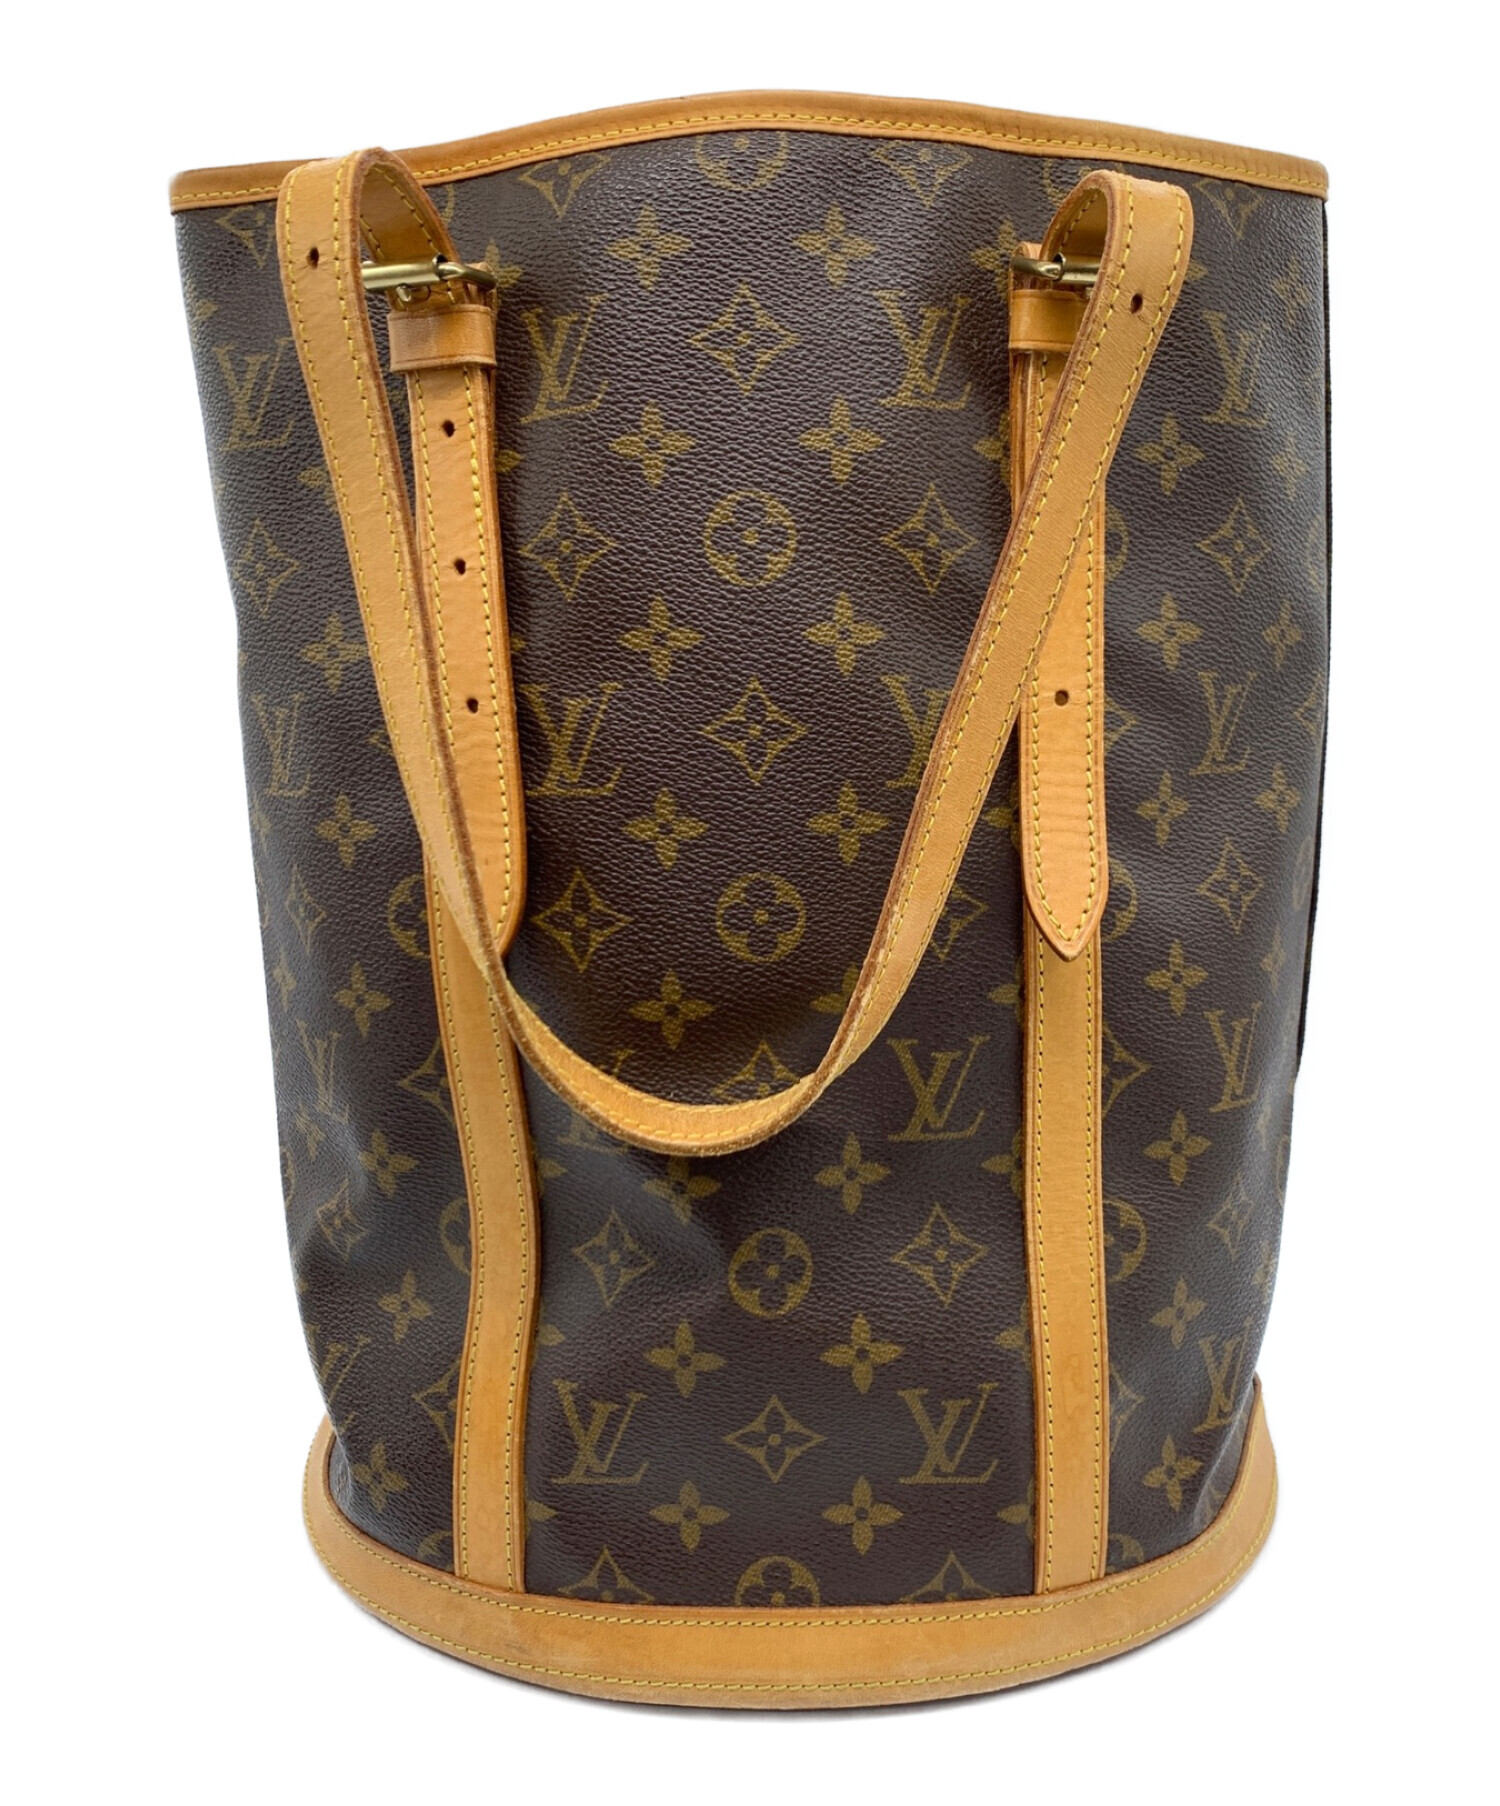 LOUIS VUITTON　ルイヴィトン　モノグラム　バケット